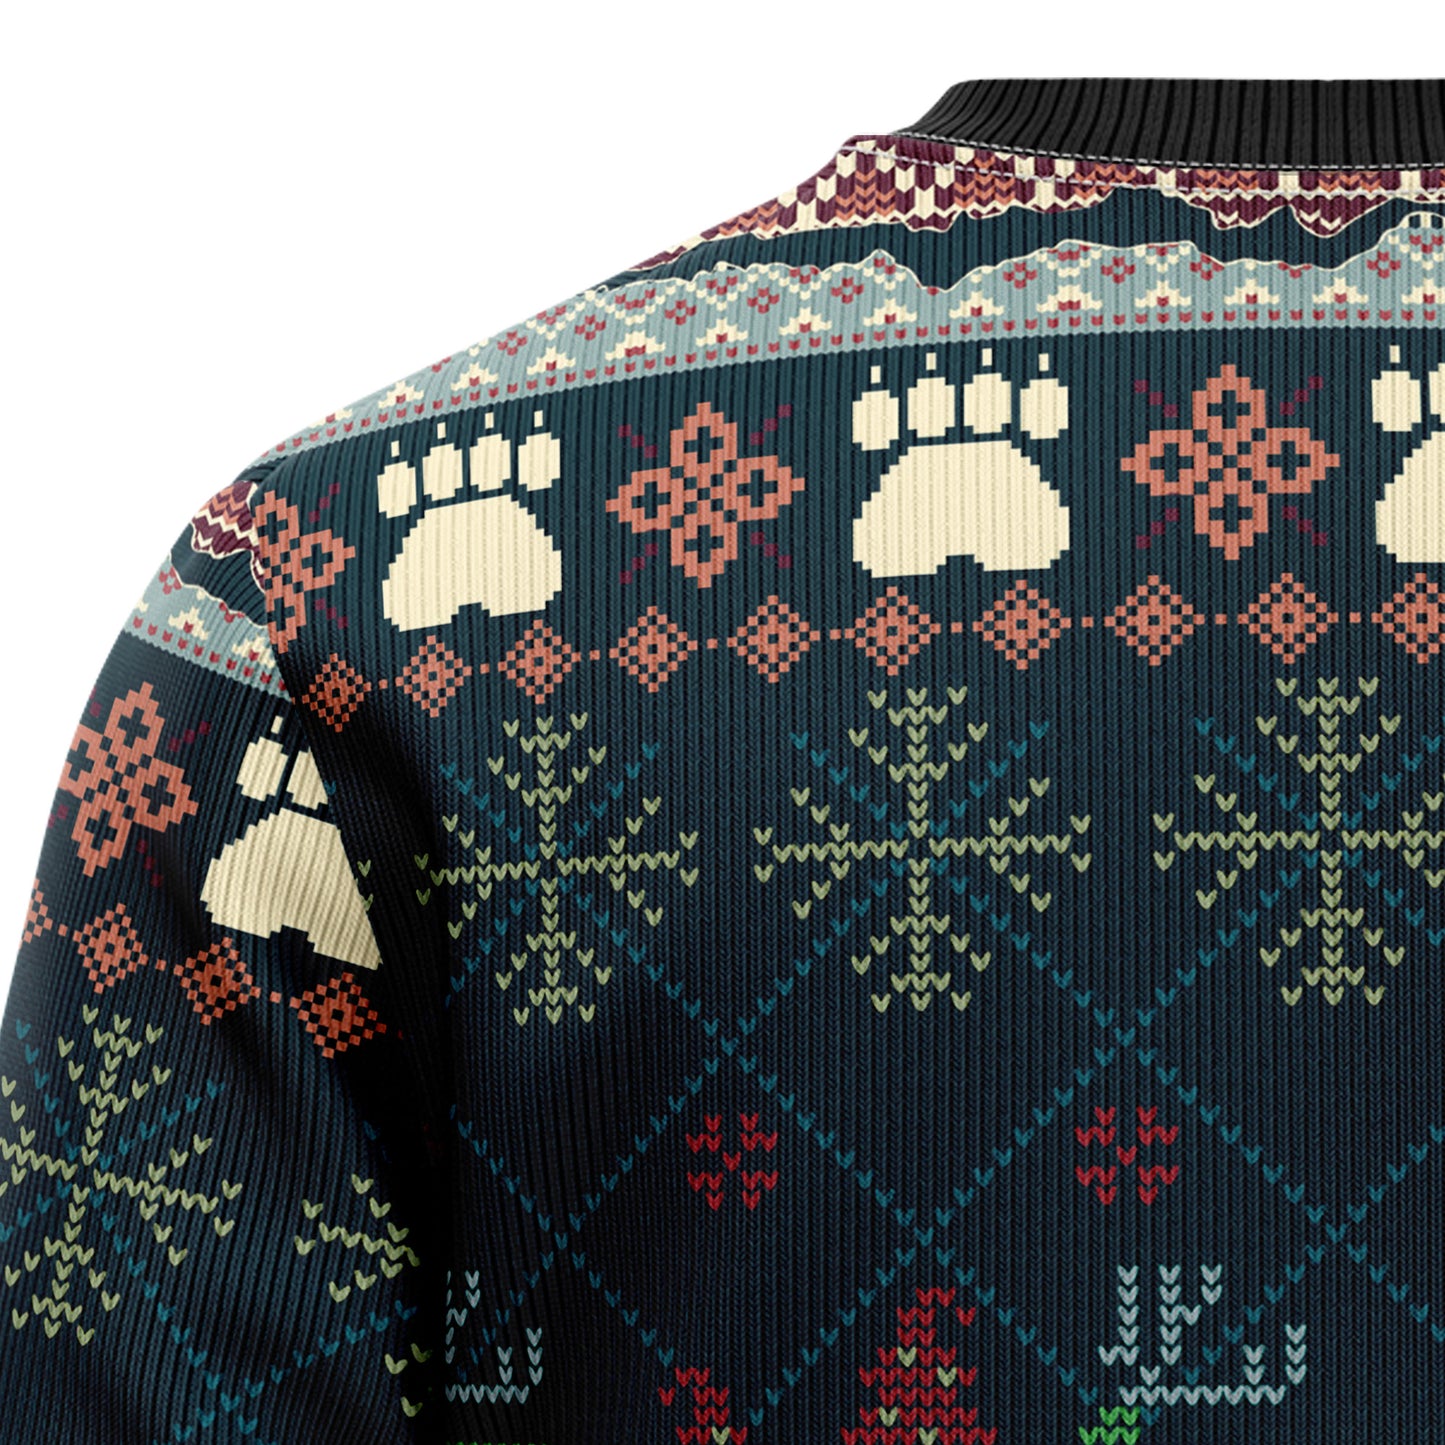 Cute Bernese Mountain Dog Christmas D1311 Ugly Christmas Sweater